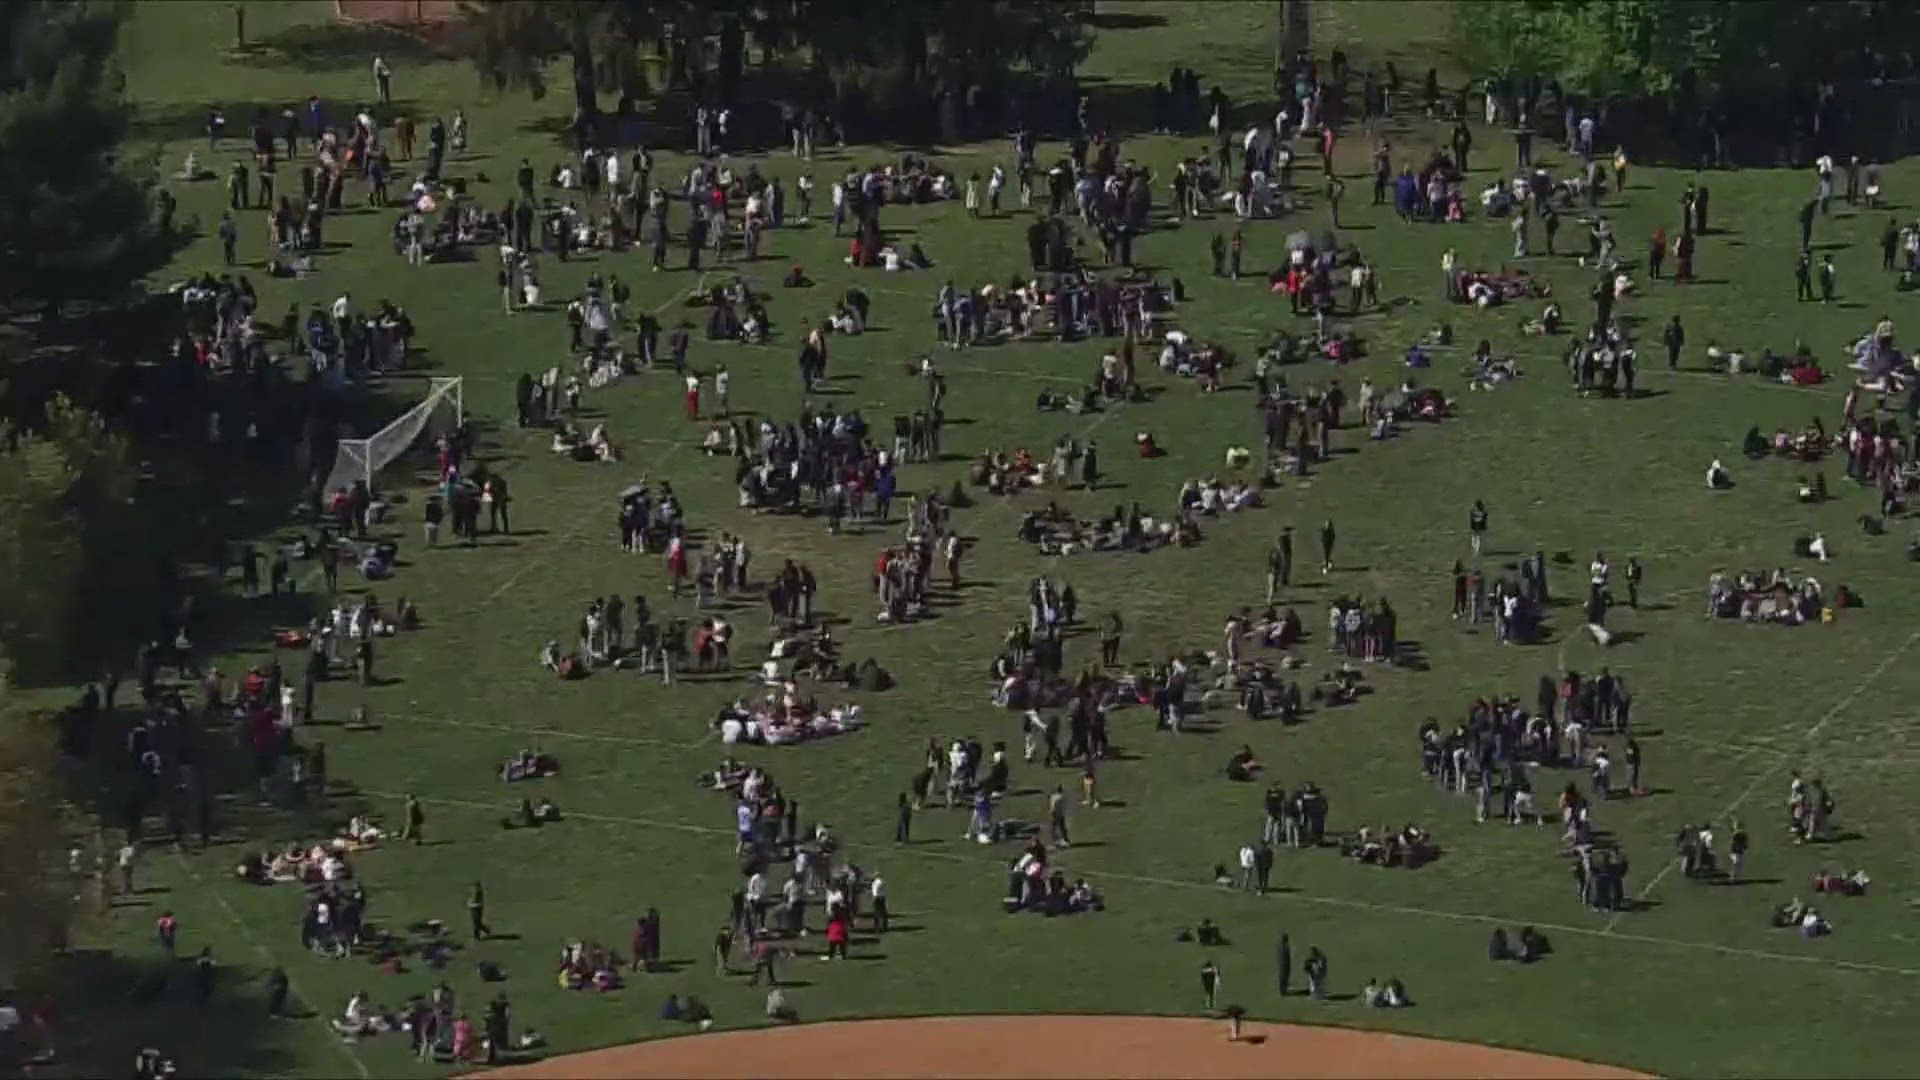 Police said on social media that Albert Einstein High School was evacuated and Wootton High School was under shelter in place status around 10:30 a.m.